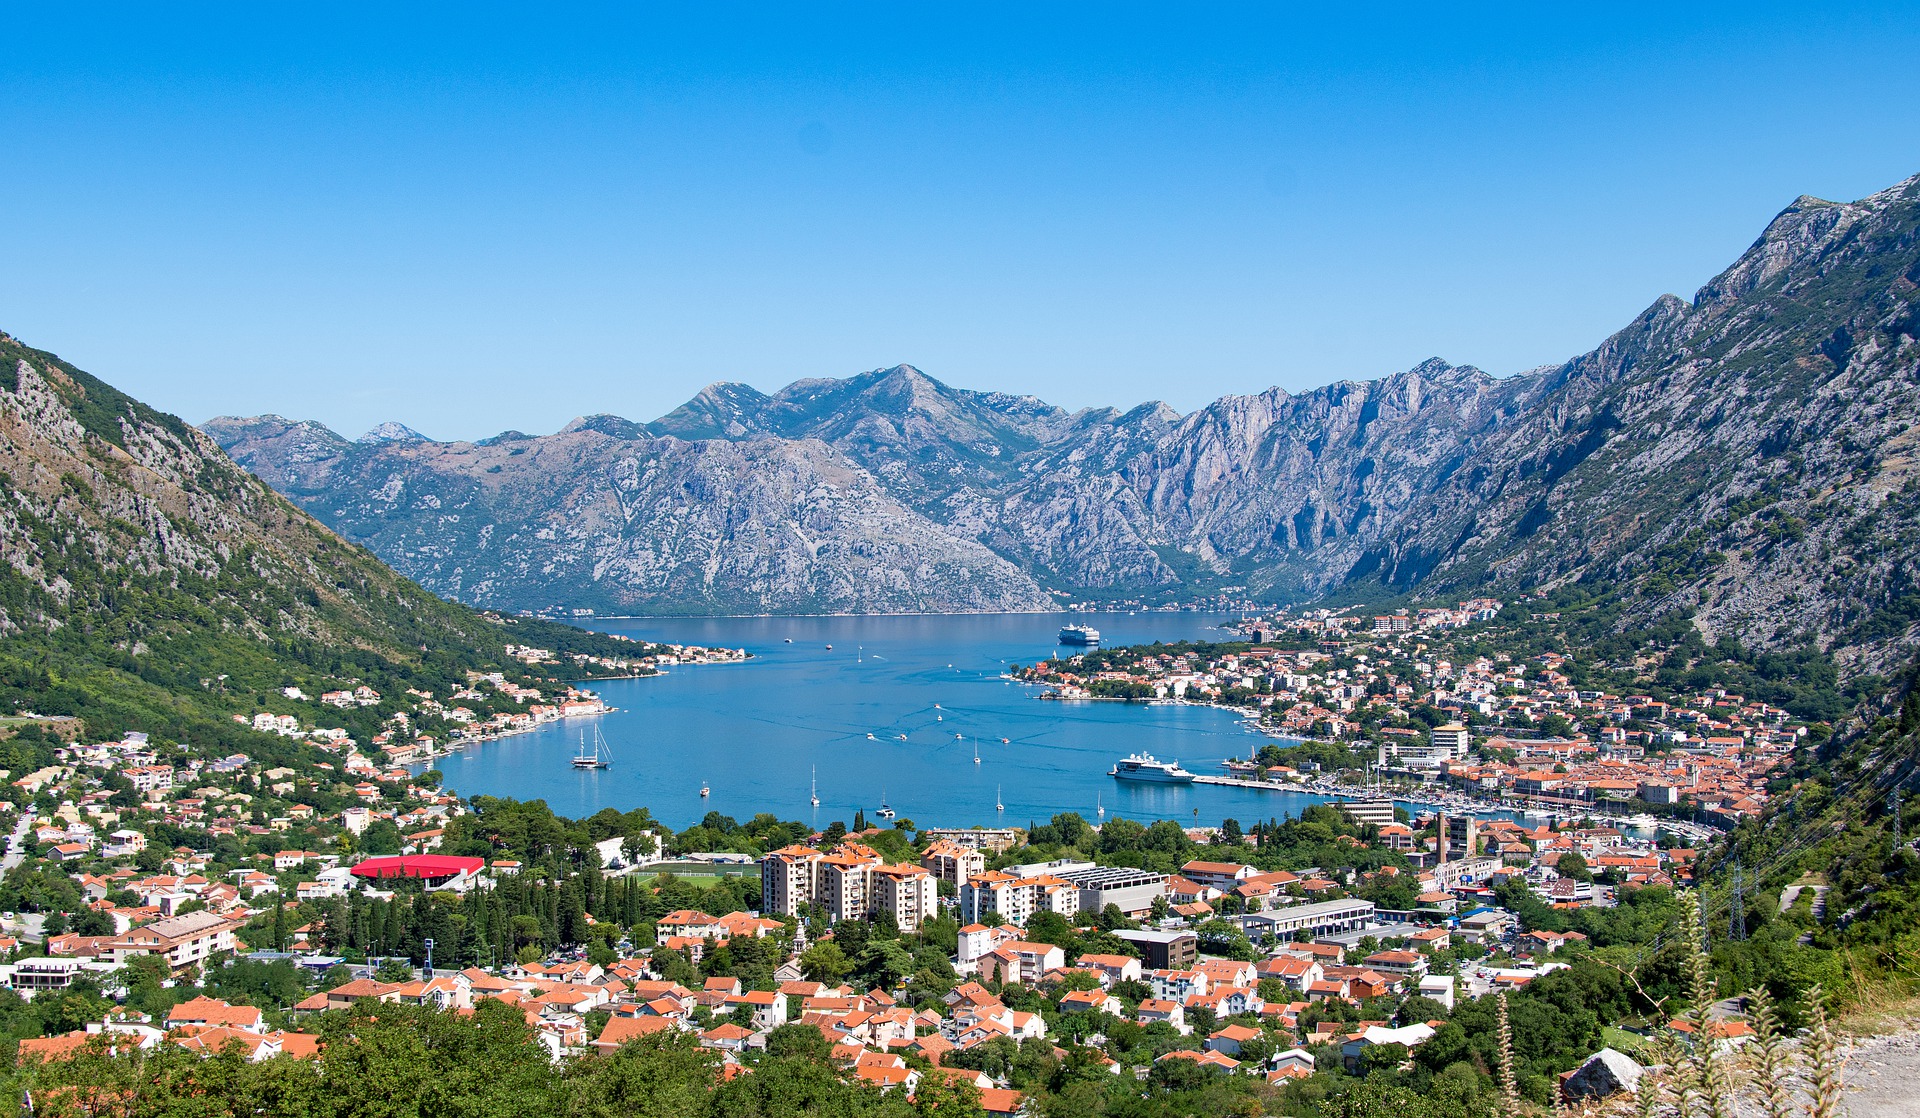 Image of Montenegro to show a part of the country where qigong workshops were held